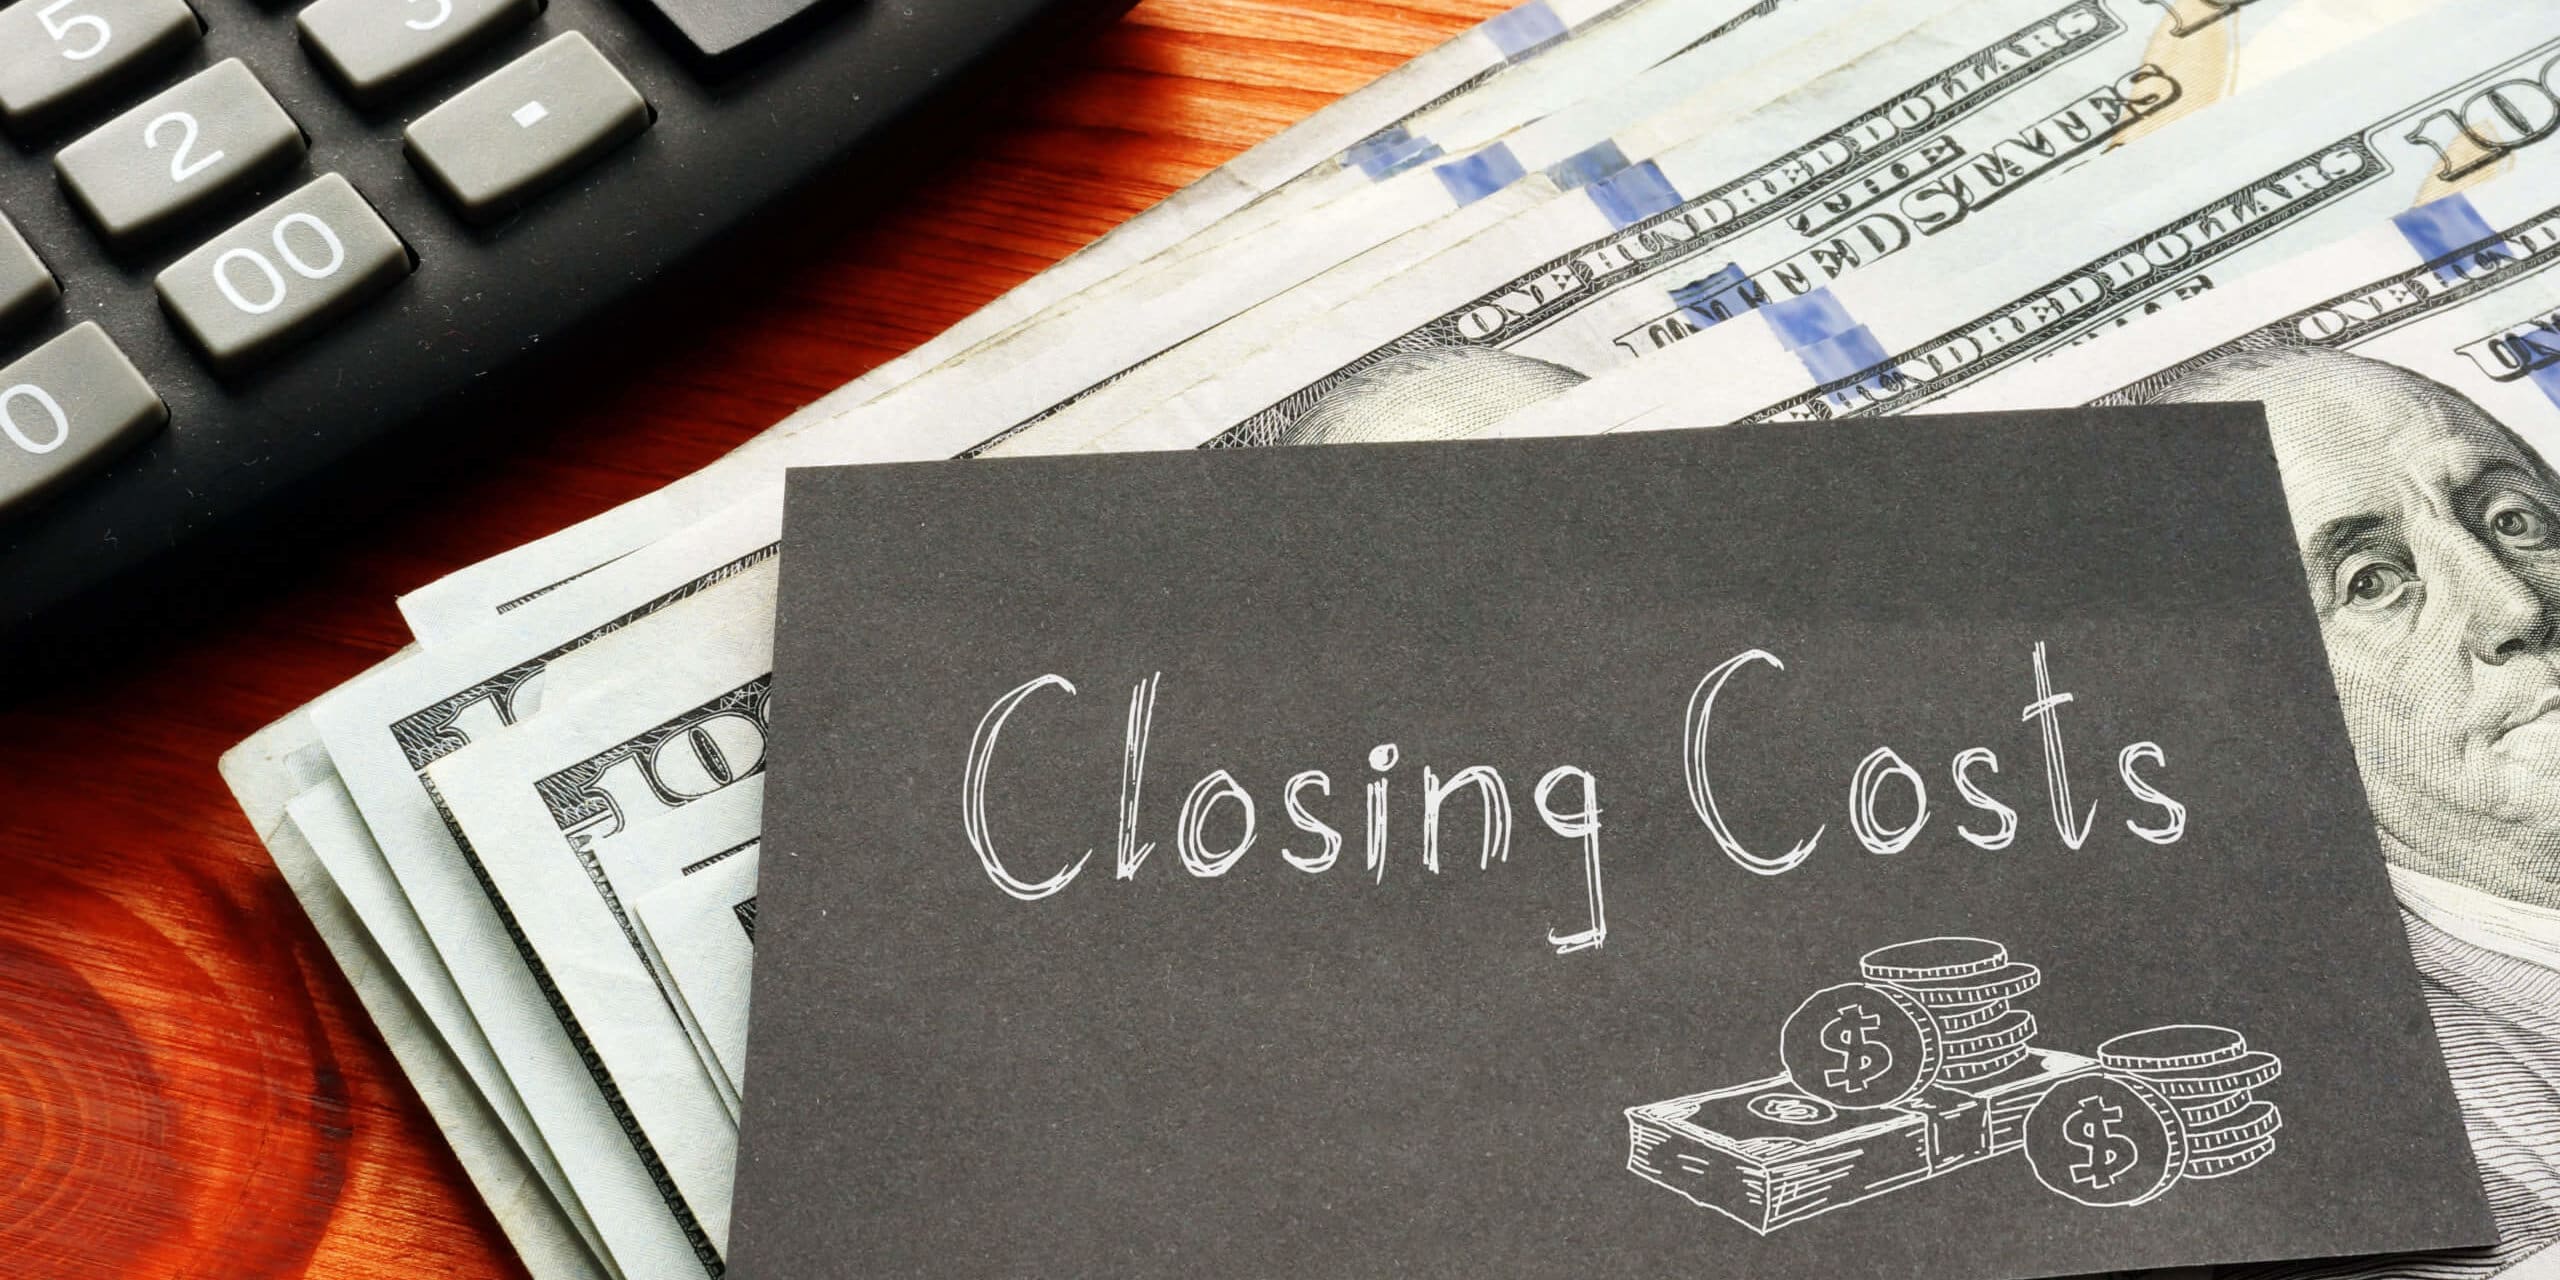 Pay the Buyer’s Closing Costs